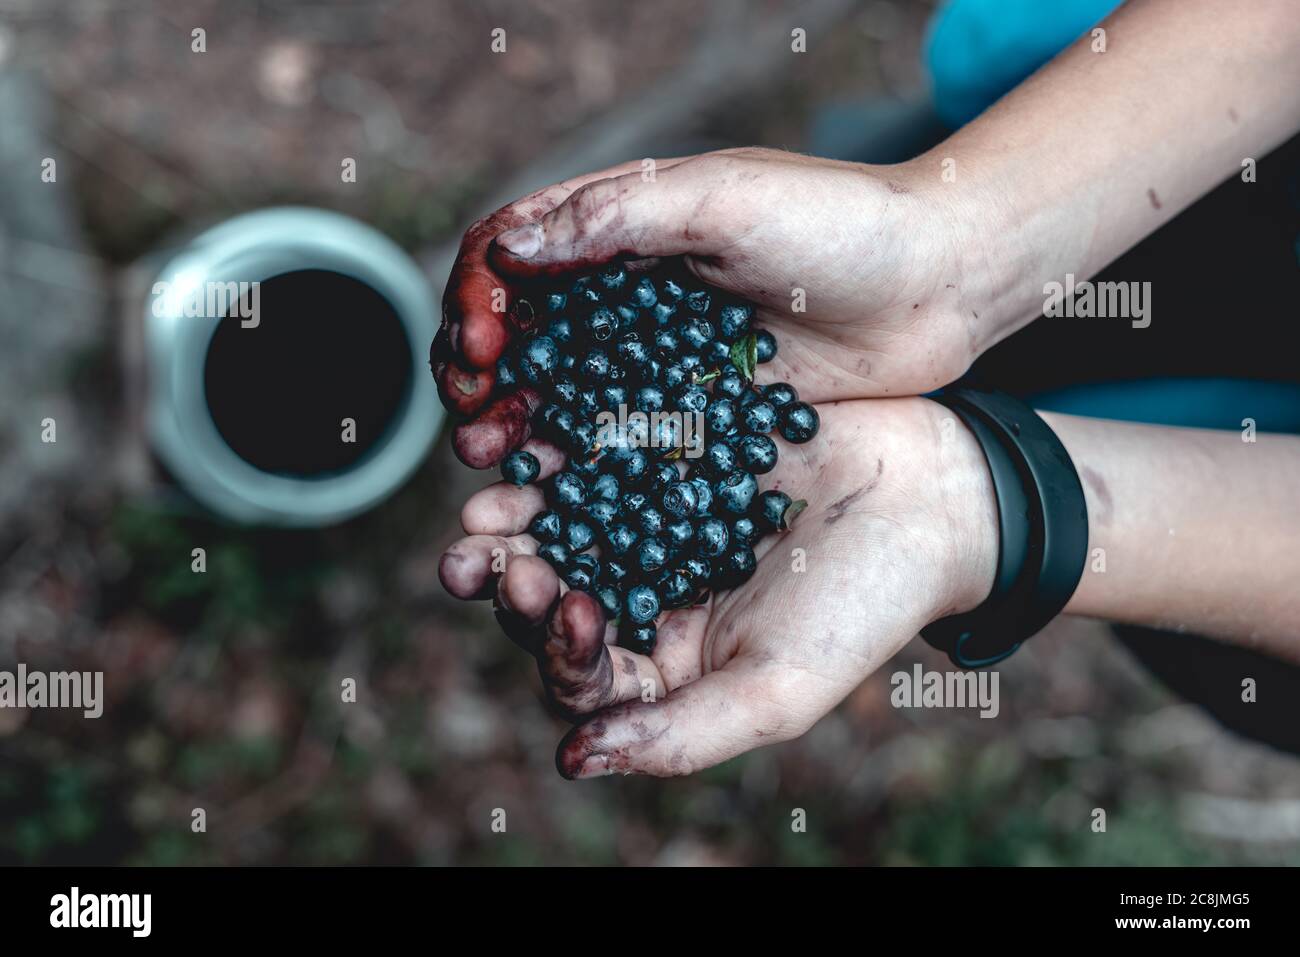 Fresh, ecological and natural forest blueberries kept in hands. Hands full of berries. Stock Photo